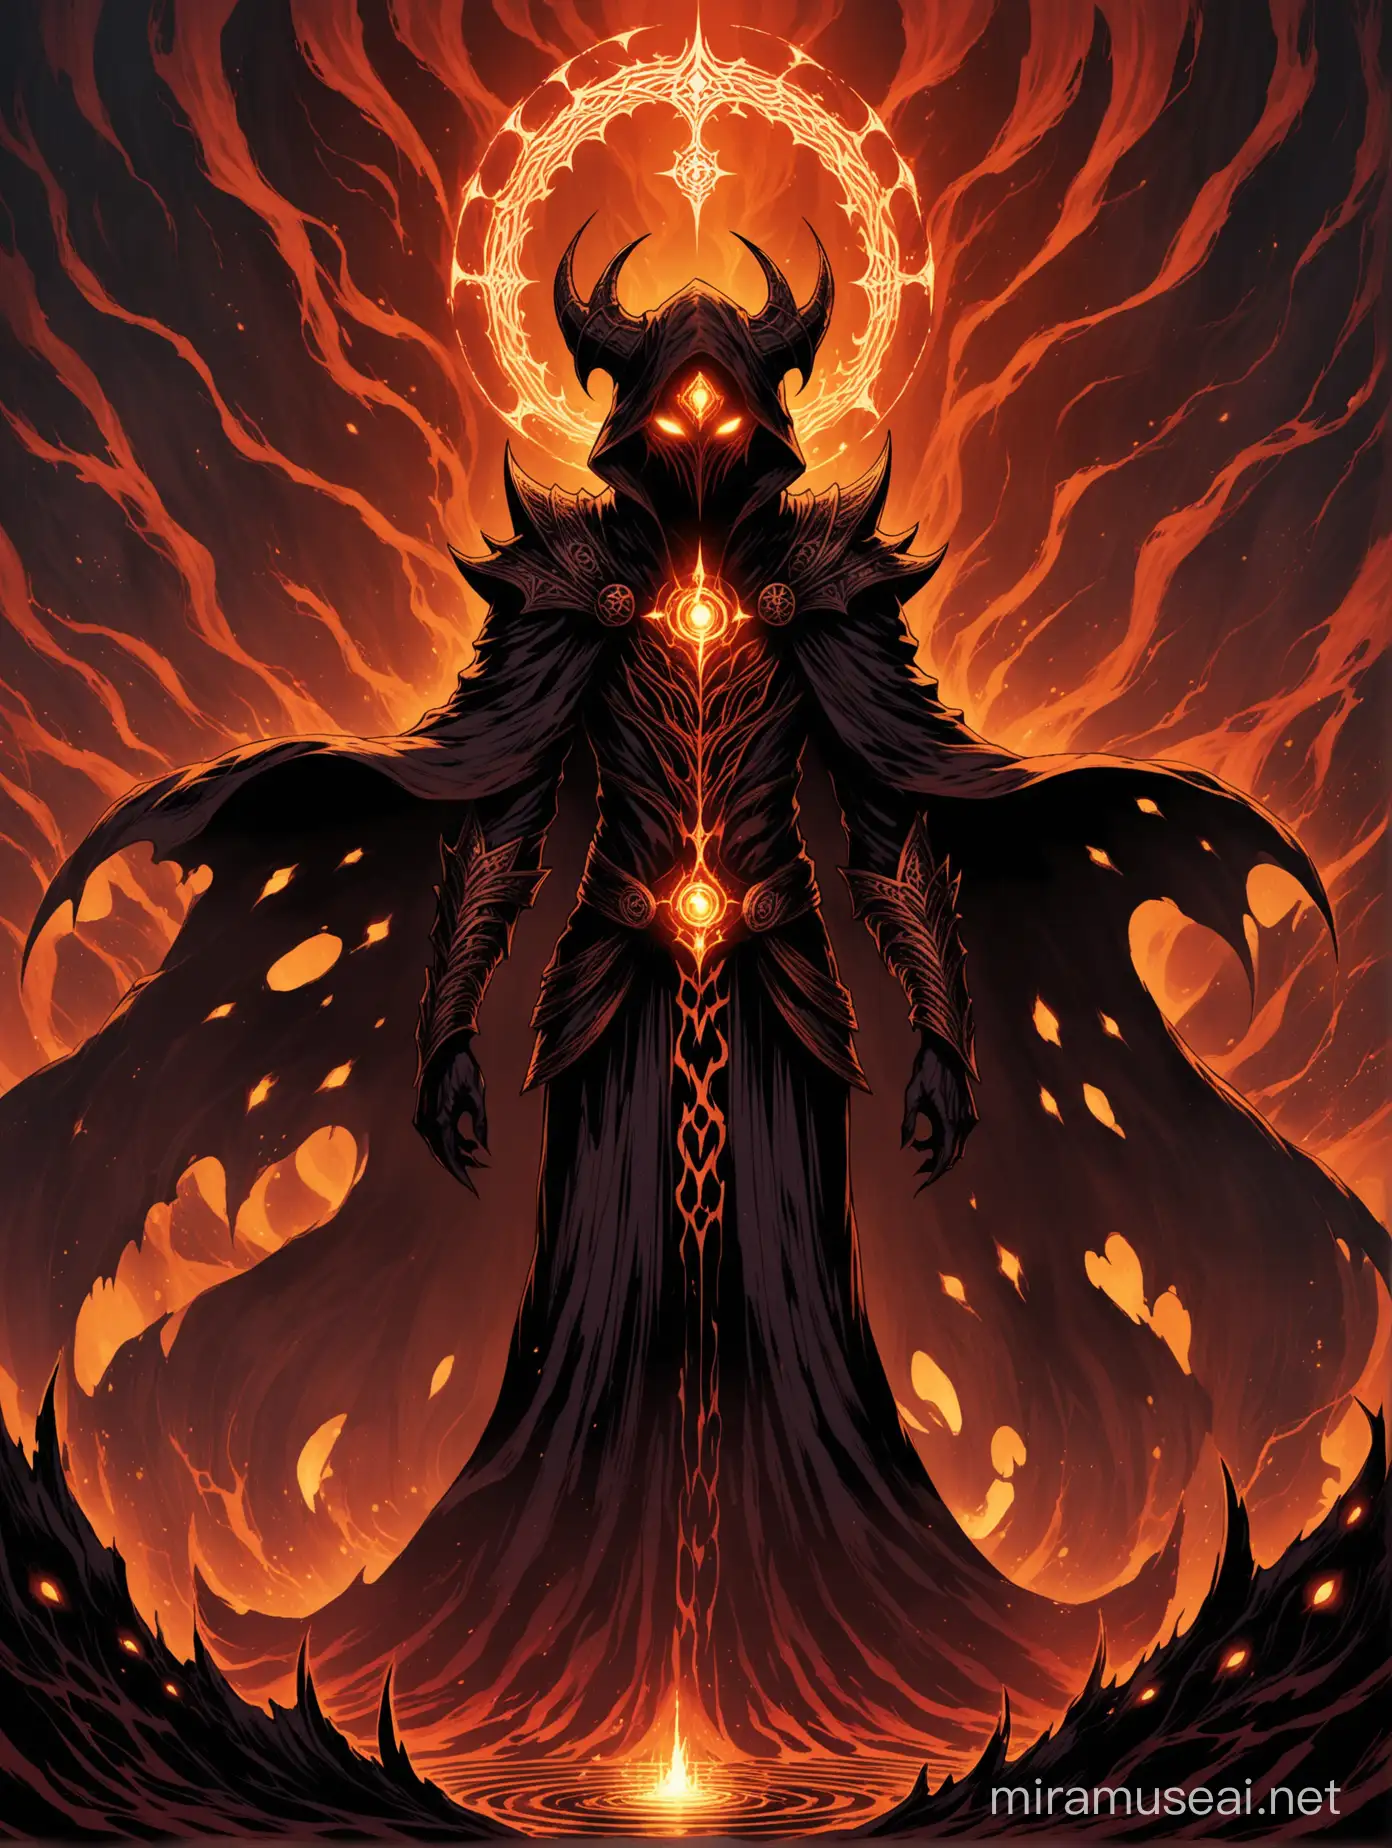 are typically cloaked in dark, billowing robes that obscure much of their form. The robes are often adorned with intricate patterns or symbols such as twisted spirals or abyssal motifs.
Their faces are concealed behind eerie masks, adding an air of anonymity and menace to their appearance. The masks may feature unsettling designs, such as grotesque faces or sinister symbols, further emphasizing their affiliation with the Abyss Order.
 Despite their obscured features, Abyss Heralds are often depicted with glowing eyes that pierce through the darkness of their attire. The eyes may emit an otherworldly glow, reflecting their connection to dark powers or entities.
Abyss Heralds are portrayed as tall and imposing figures, exuding an aura of power and authority. Their presence commands respect and instills fear in those who oppose them, making them formidable adversaries in battle.
Surrounding an Abyss Herald is often a dark, ominous aura, symbolizing their connection to the Abyss and the corrupting influence of their organization. This aura may manifest as swirling shadows or tendrils of darkness, hinting at the sinister forces at their command.

LOOKS LIKE AN ABYSS HERALD FROM GENSHIN IMPACT

The color of this is dark orange, dark red, and yellows